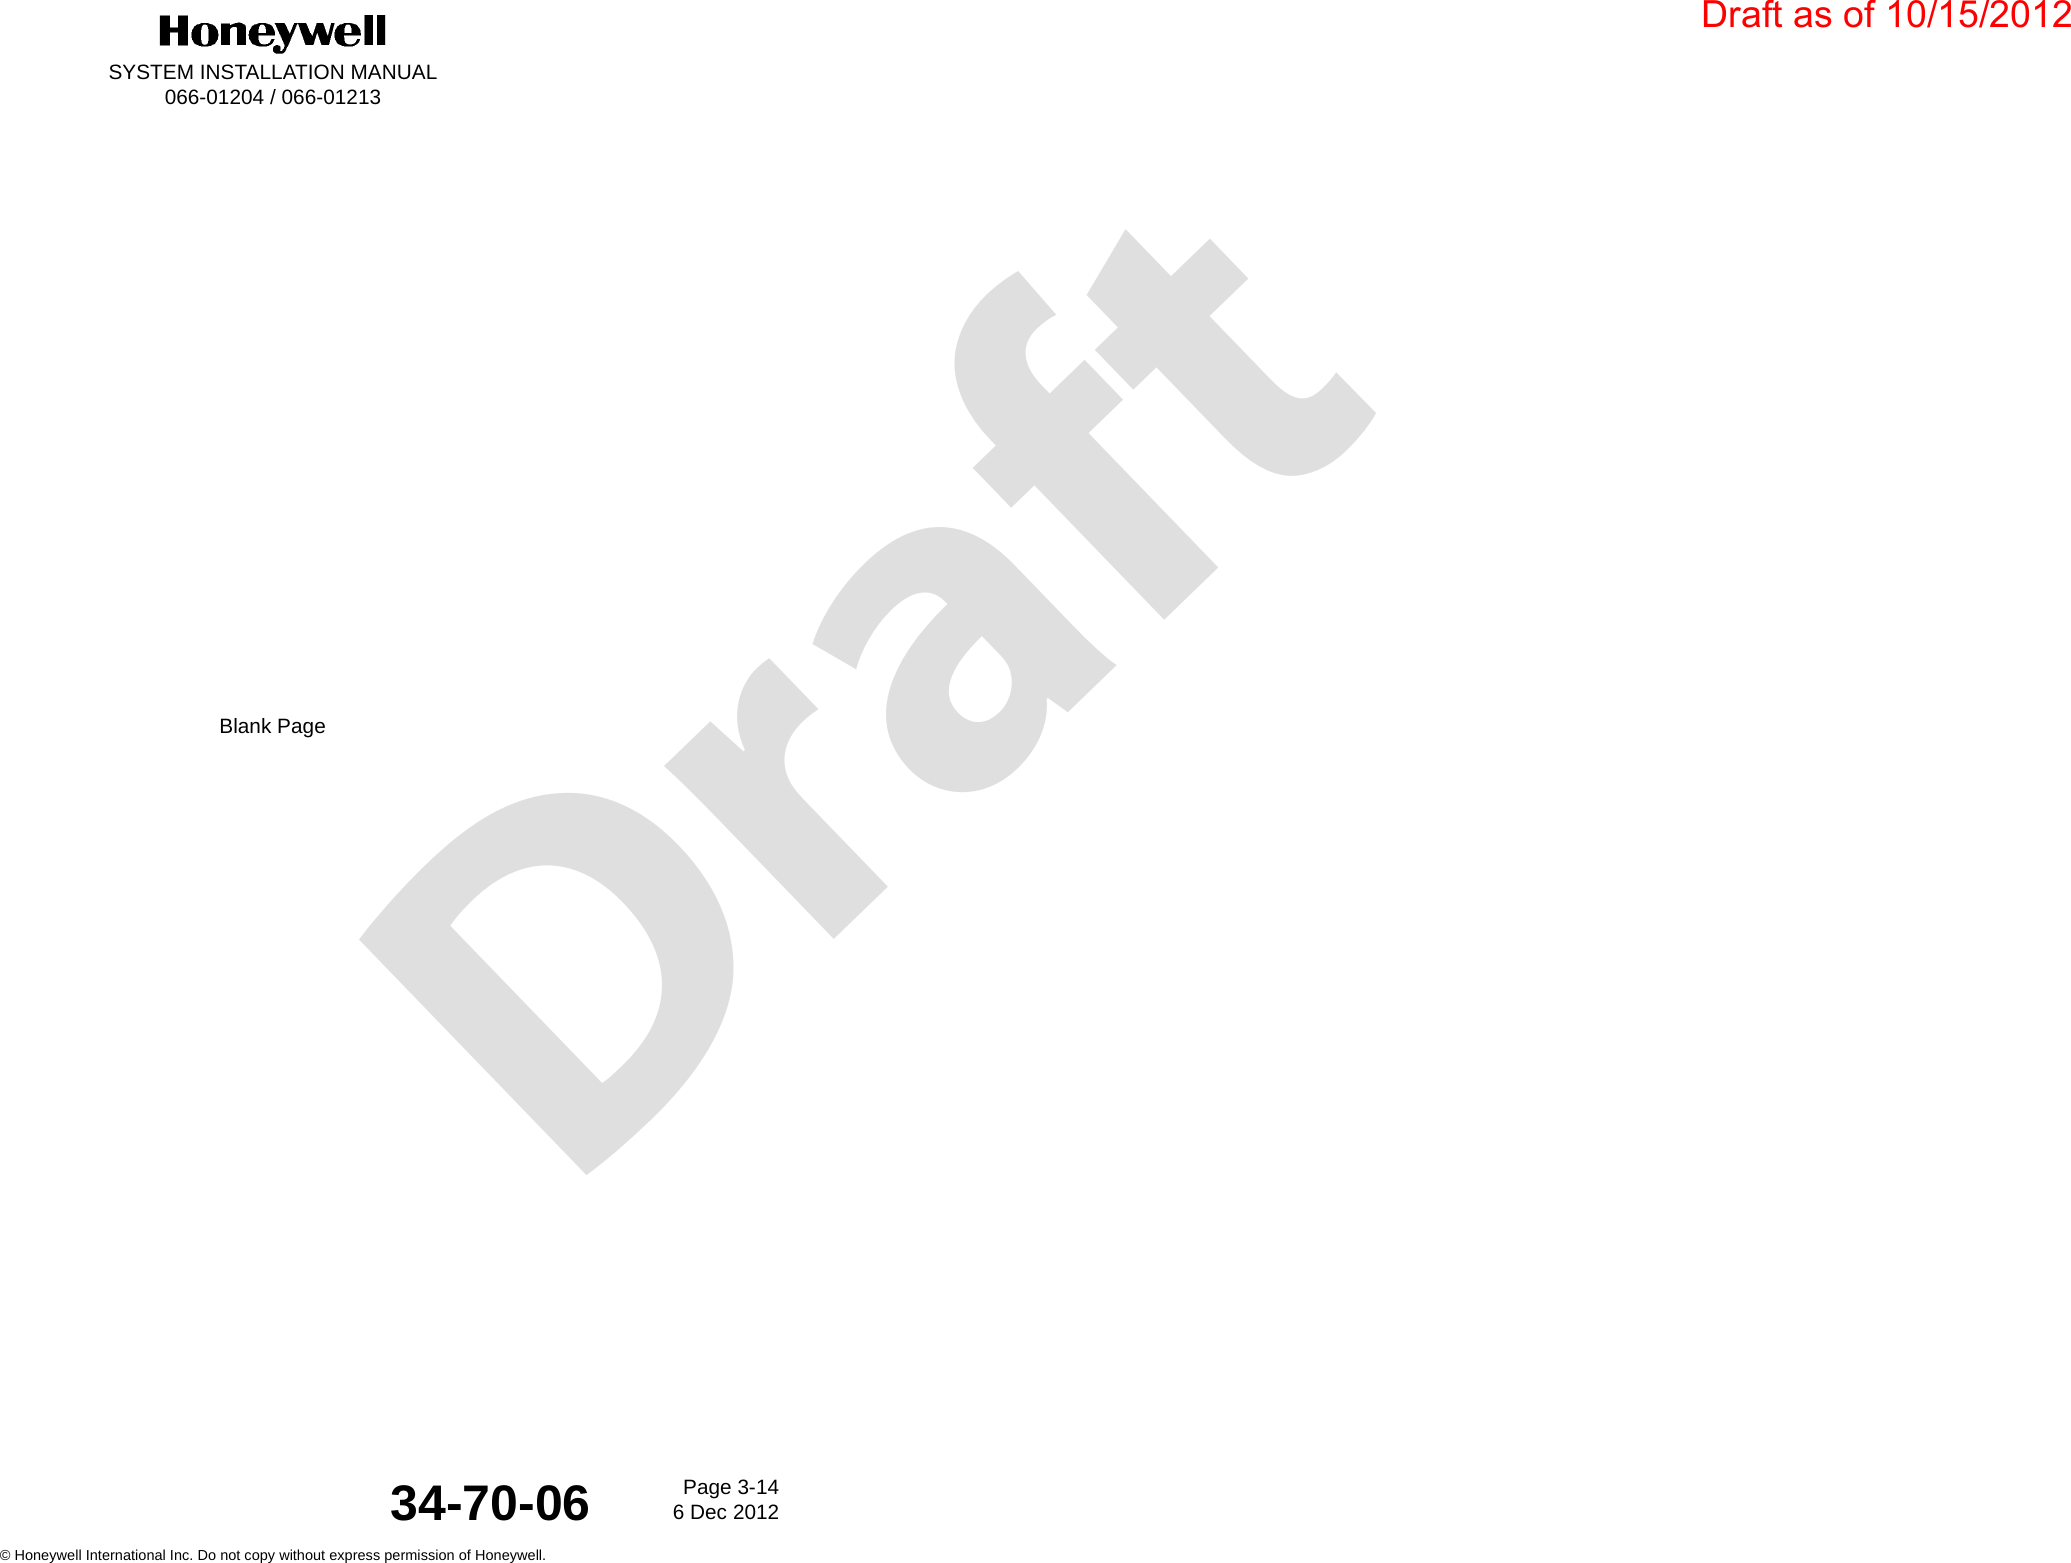 DraftSYSTEM INSTALLATION MANUAL066-01204 / 066-01213Page 3-146 Dec 2012© Honeywell International Inc. Do not copy without express permission of Honeywell.34-70-06Blank PageDraft as of 10/15/2012